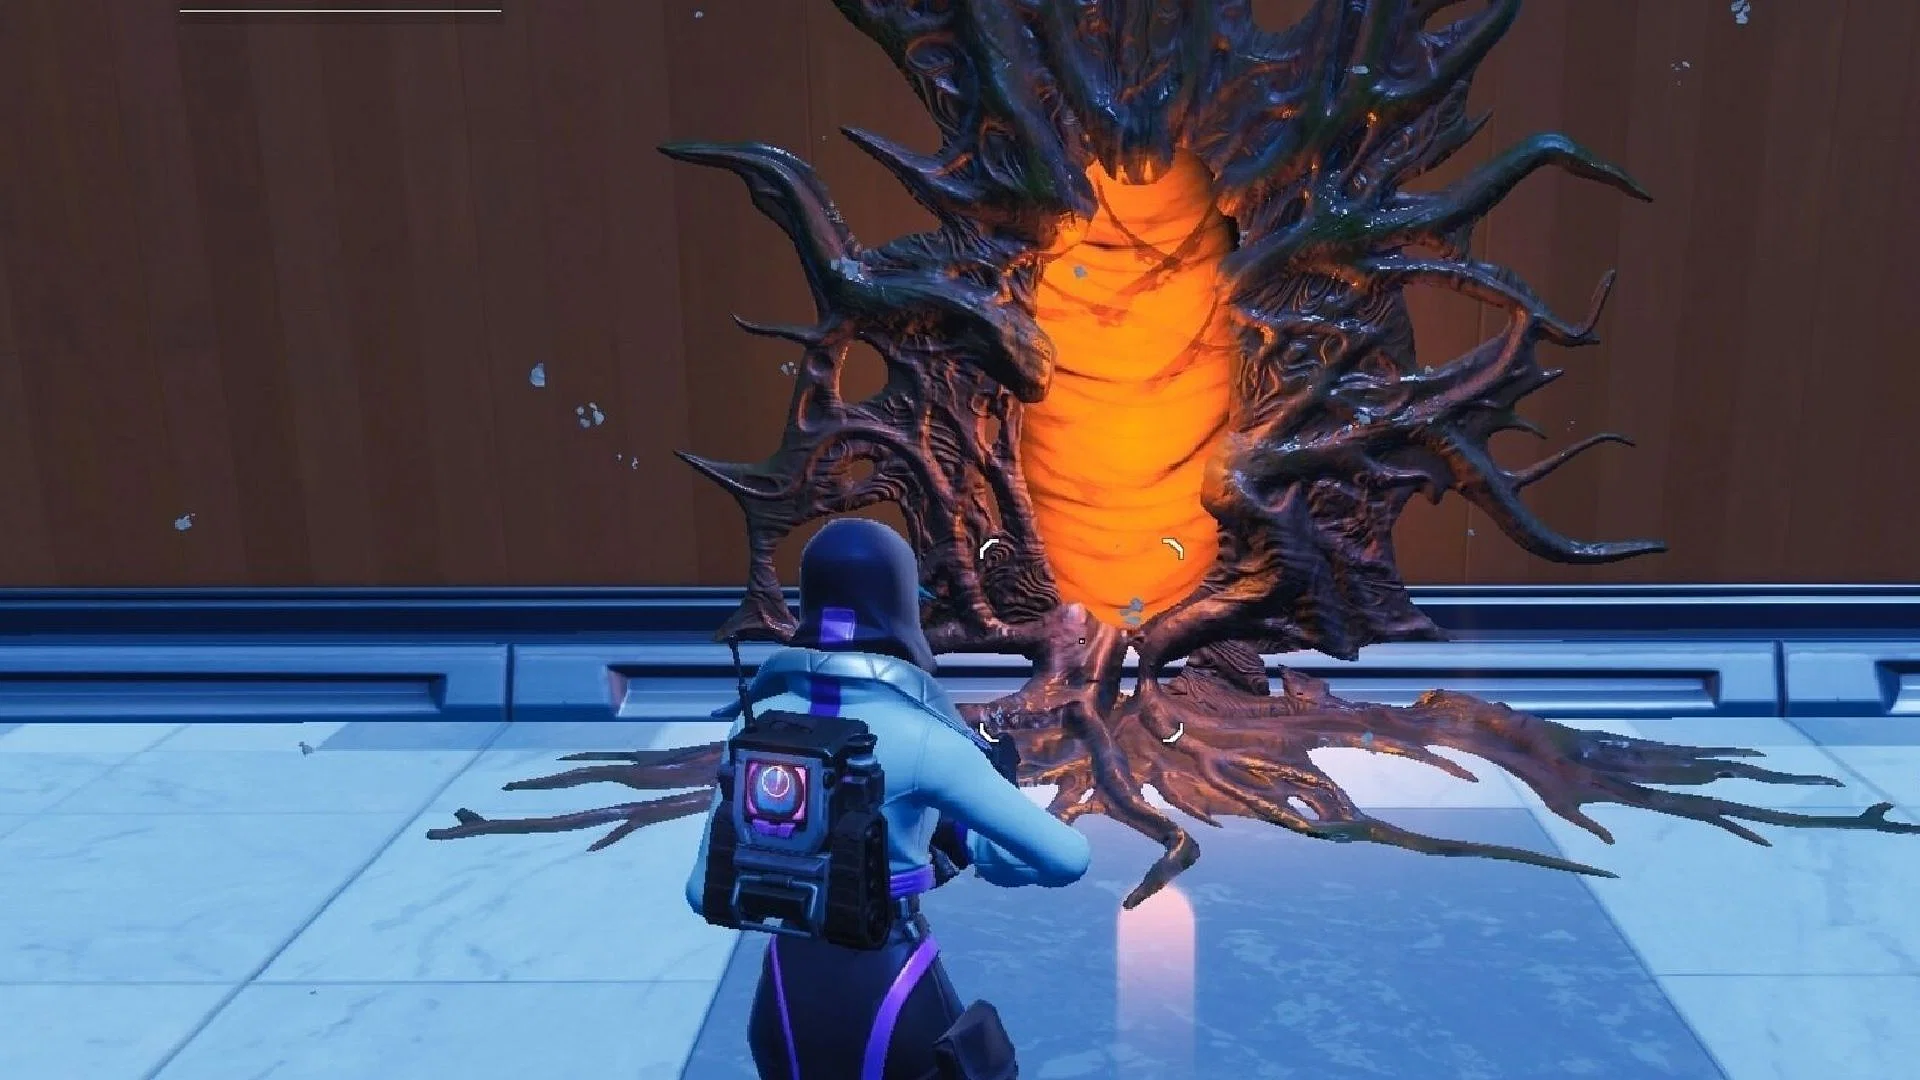 Fortnite teases collaboration with Stranger Things ahead of new season release